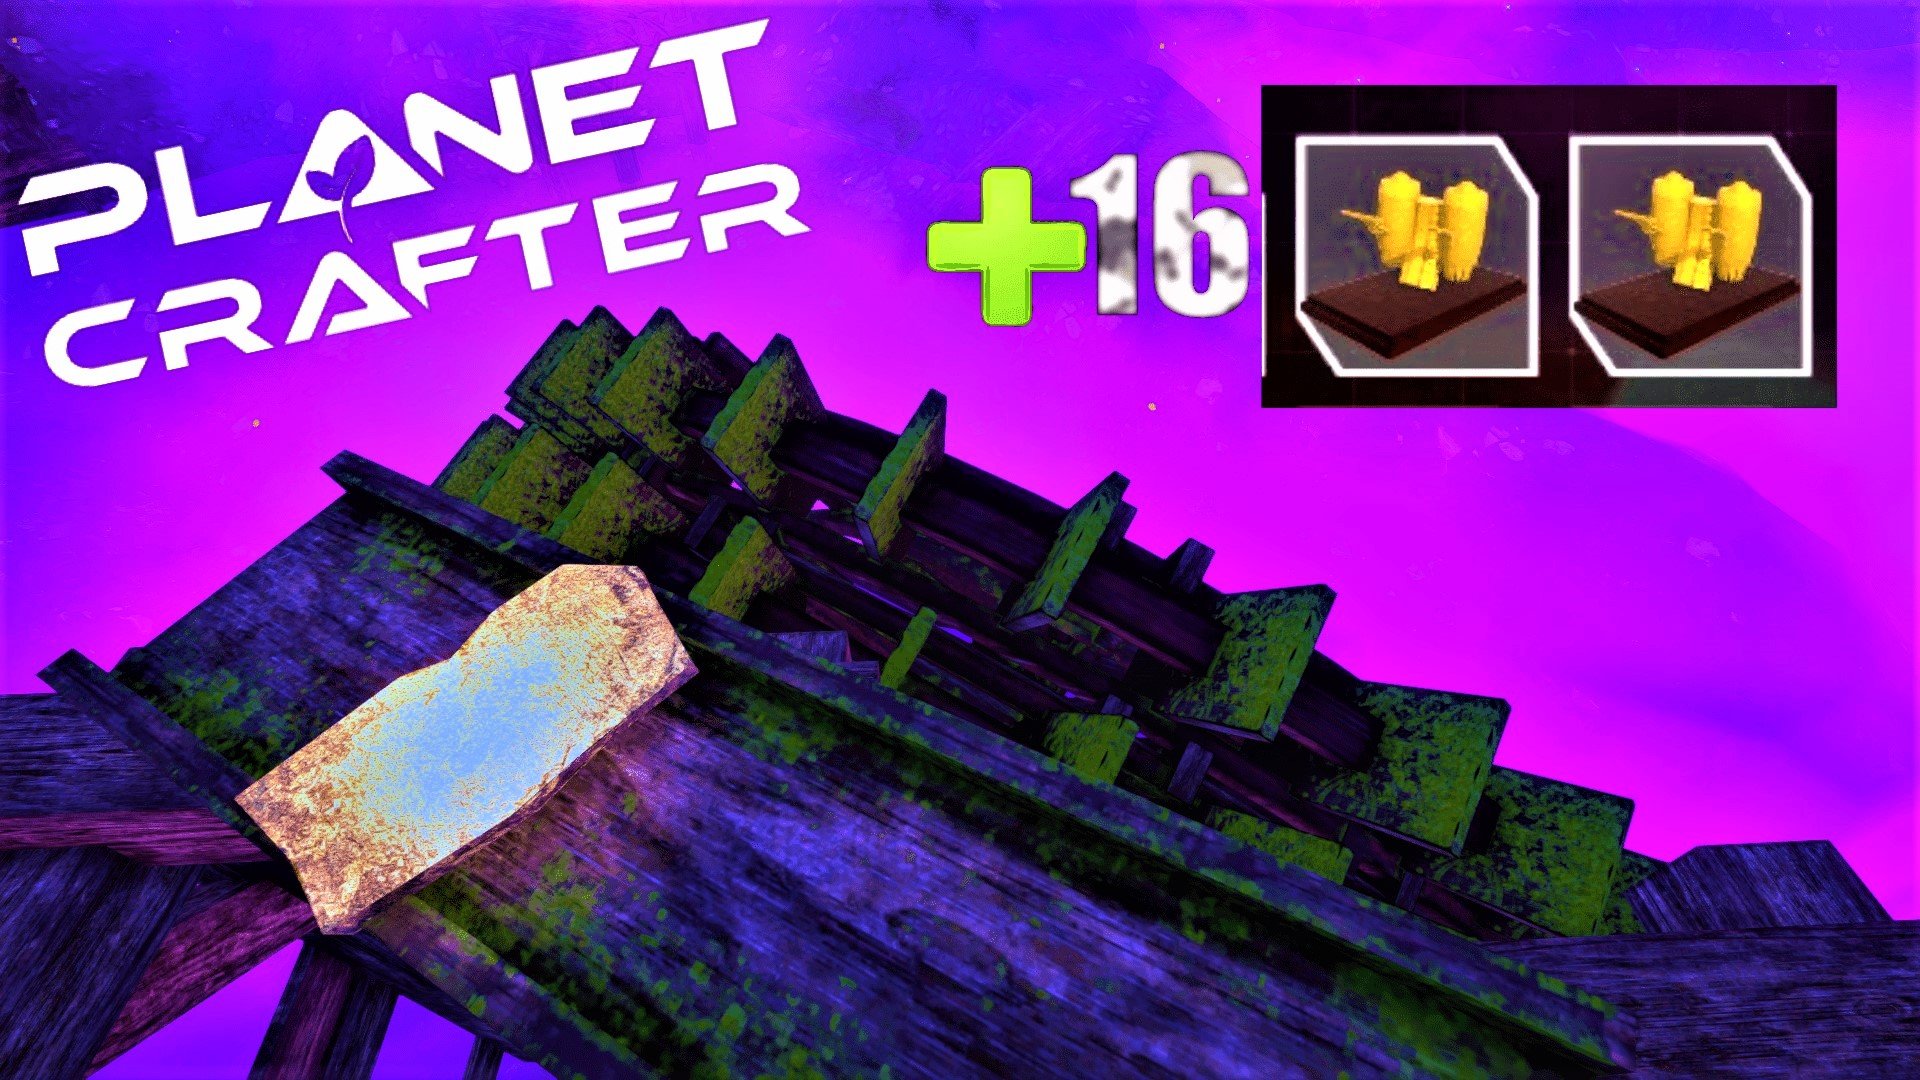 The planet crafter читы. The Planet Crafter. Planet Crafter базы. The Planet Crafter последнее обновление. Planet Crafter личинка.